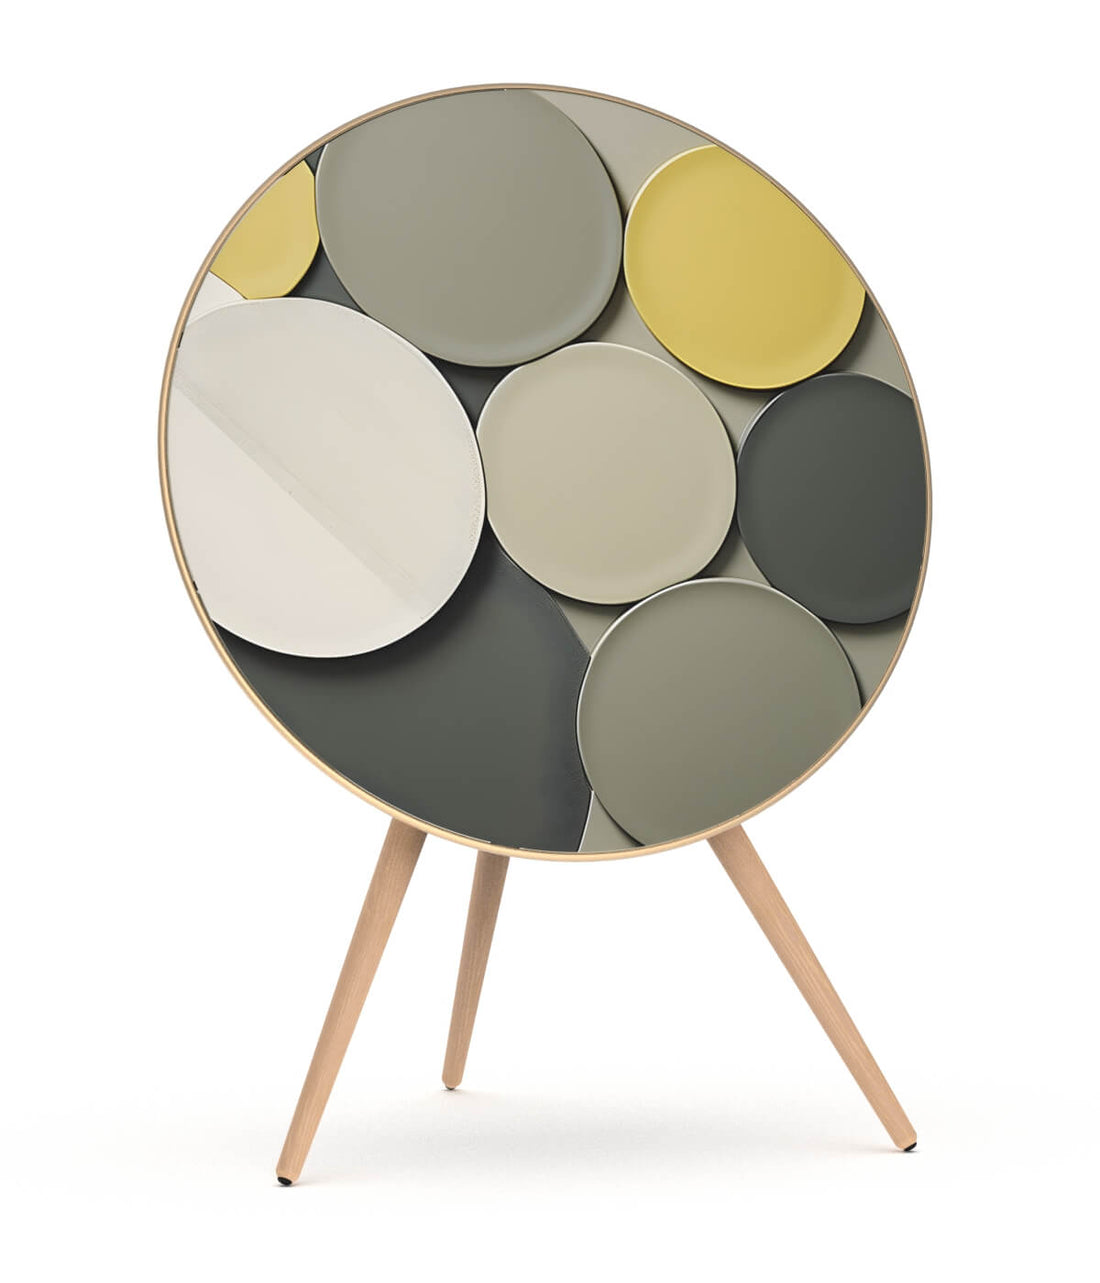 Skiniplay cover Paint for Bang & Olufsen Beoplay A9 and Beosound A9 speaker